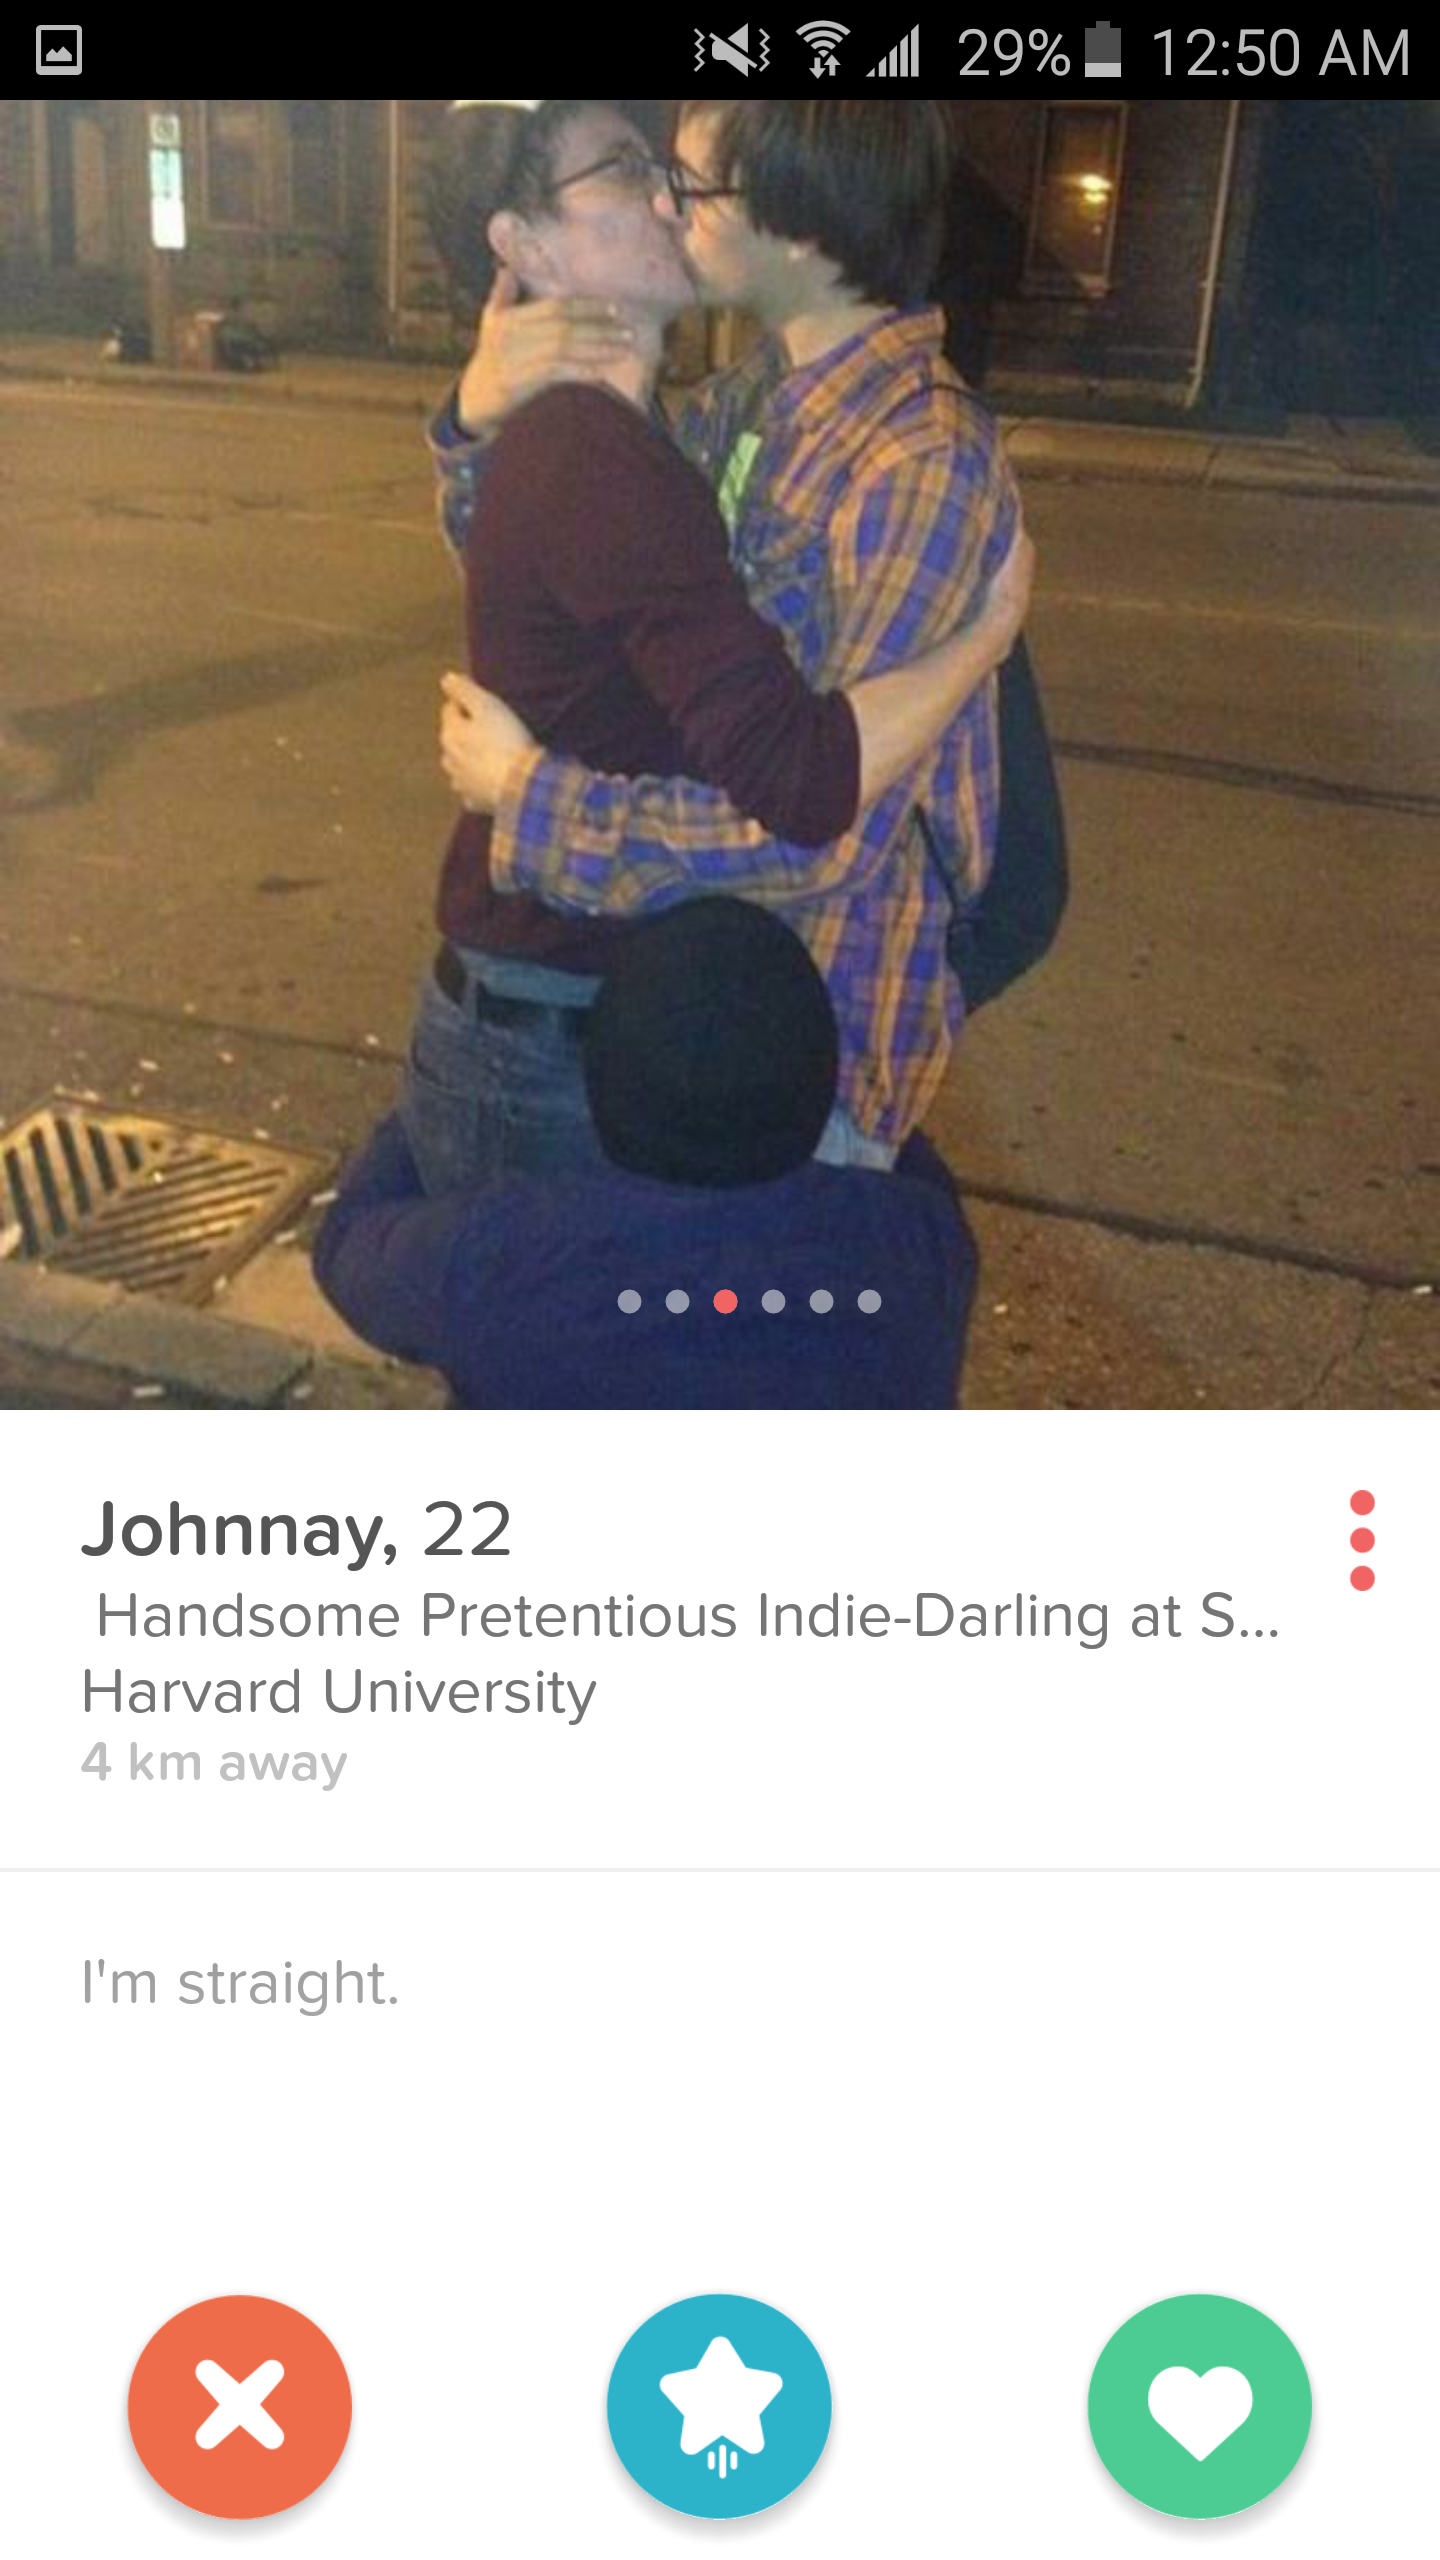 fucking girls from tinder - N . 29%. Johnnay, 22 Handsome Pretentious Indie Darling at S... Harvard University 4.km away I'm straight